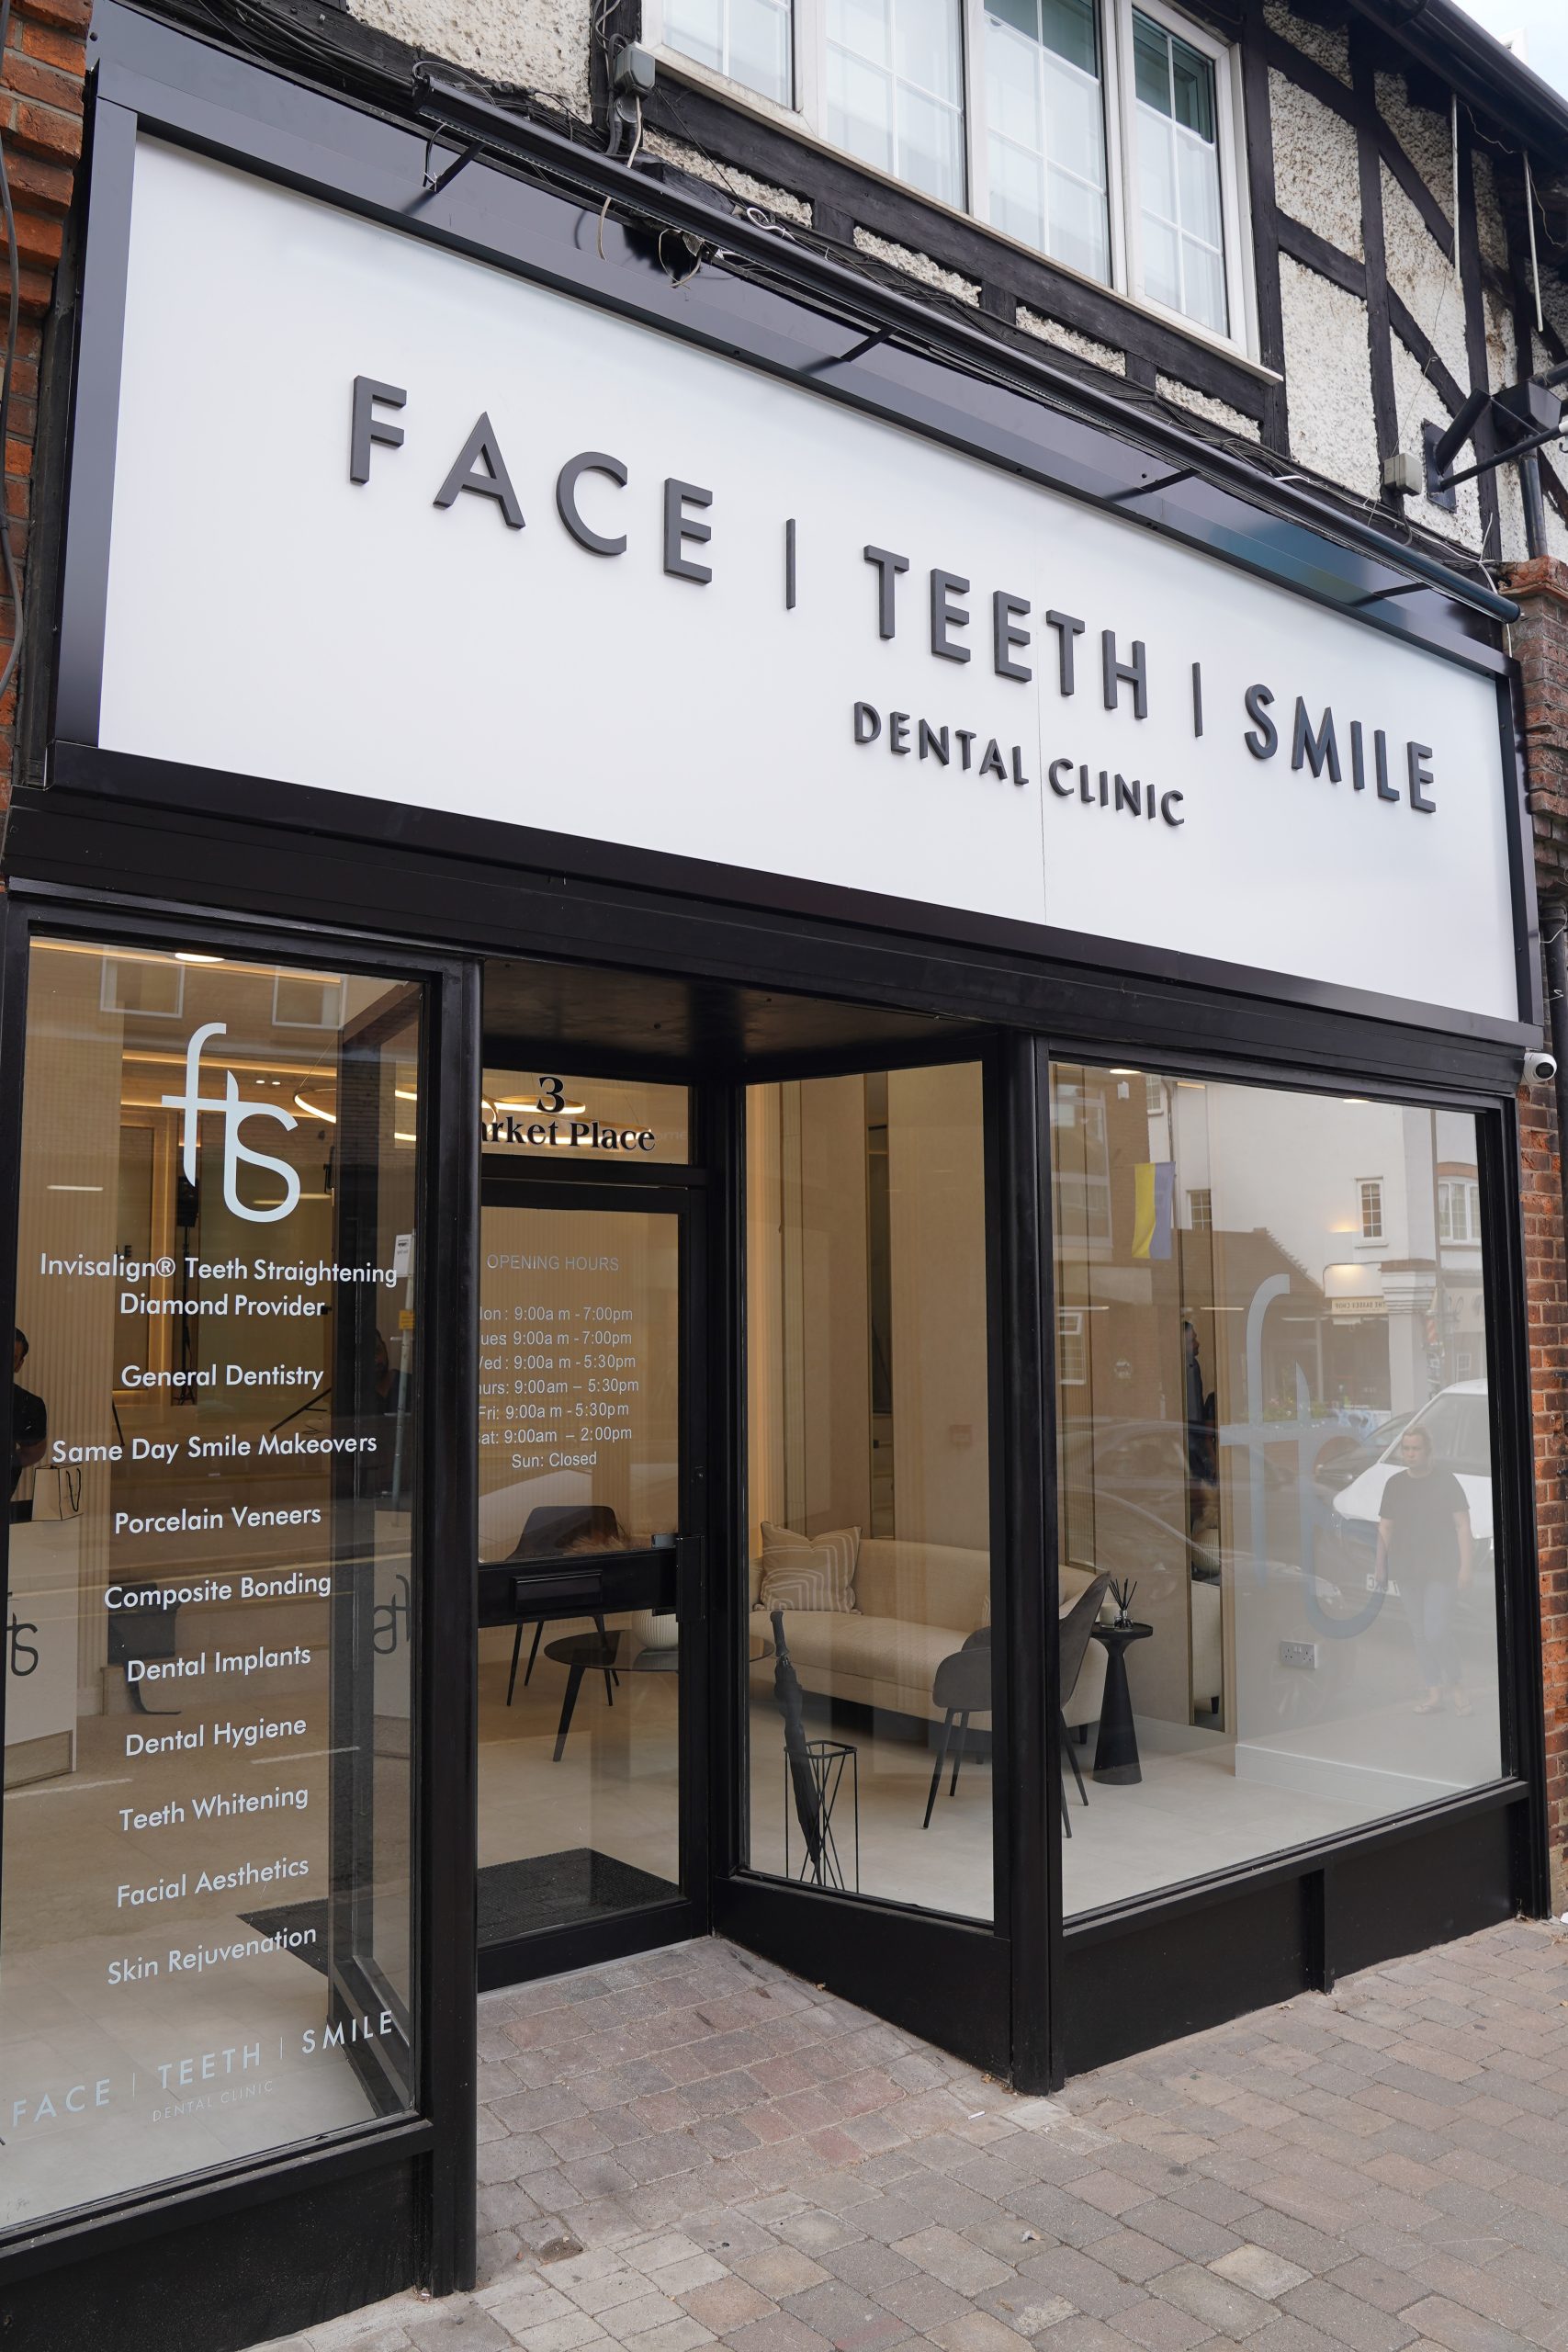 Face Teeth Smile opened its doors in July 2022